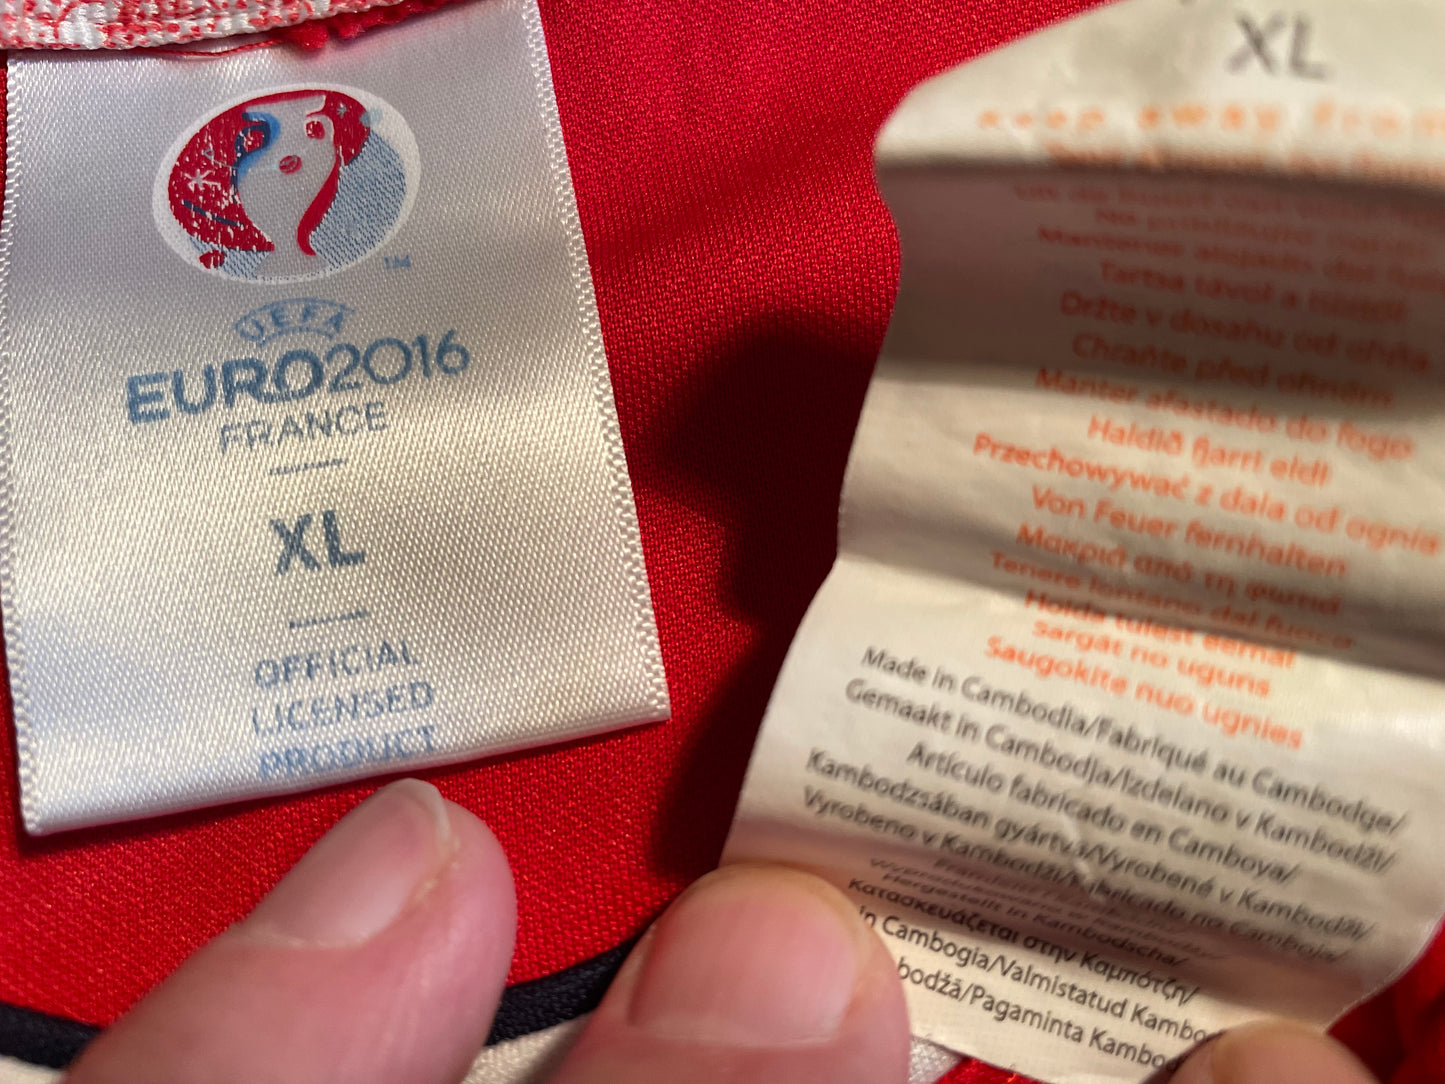 Euro 2016 England Fan Shirt (excellent) Adults XL. Height 25 inches